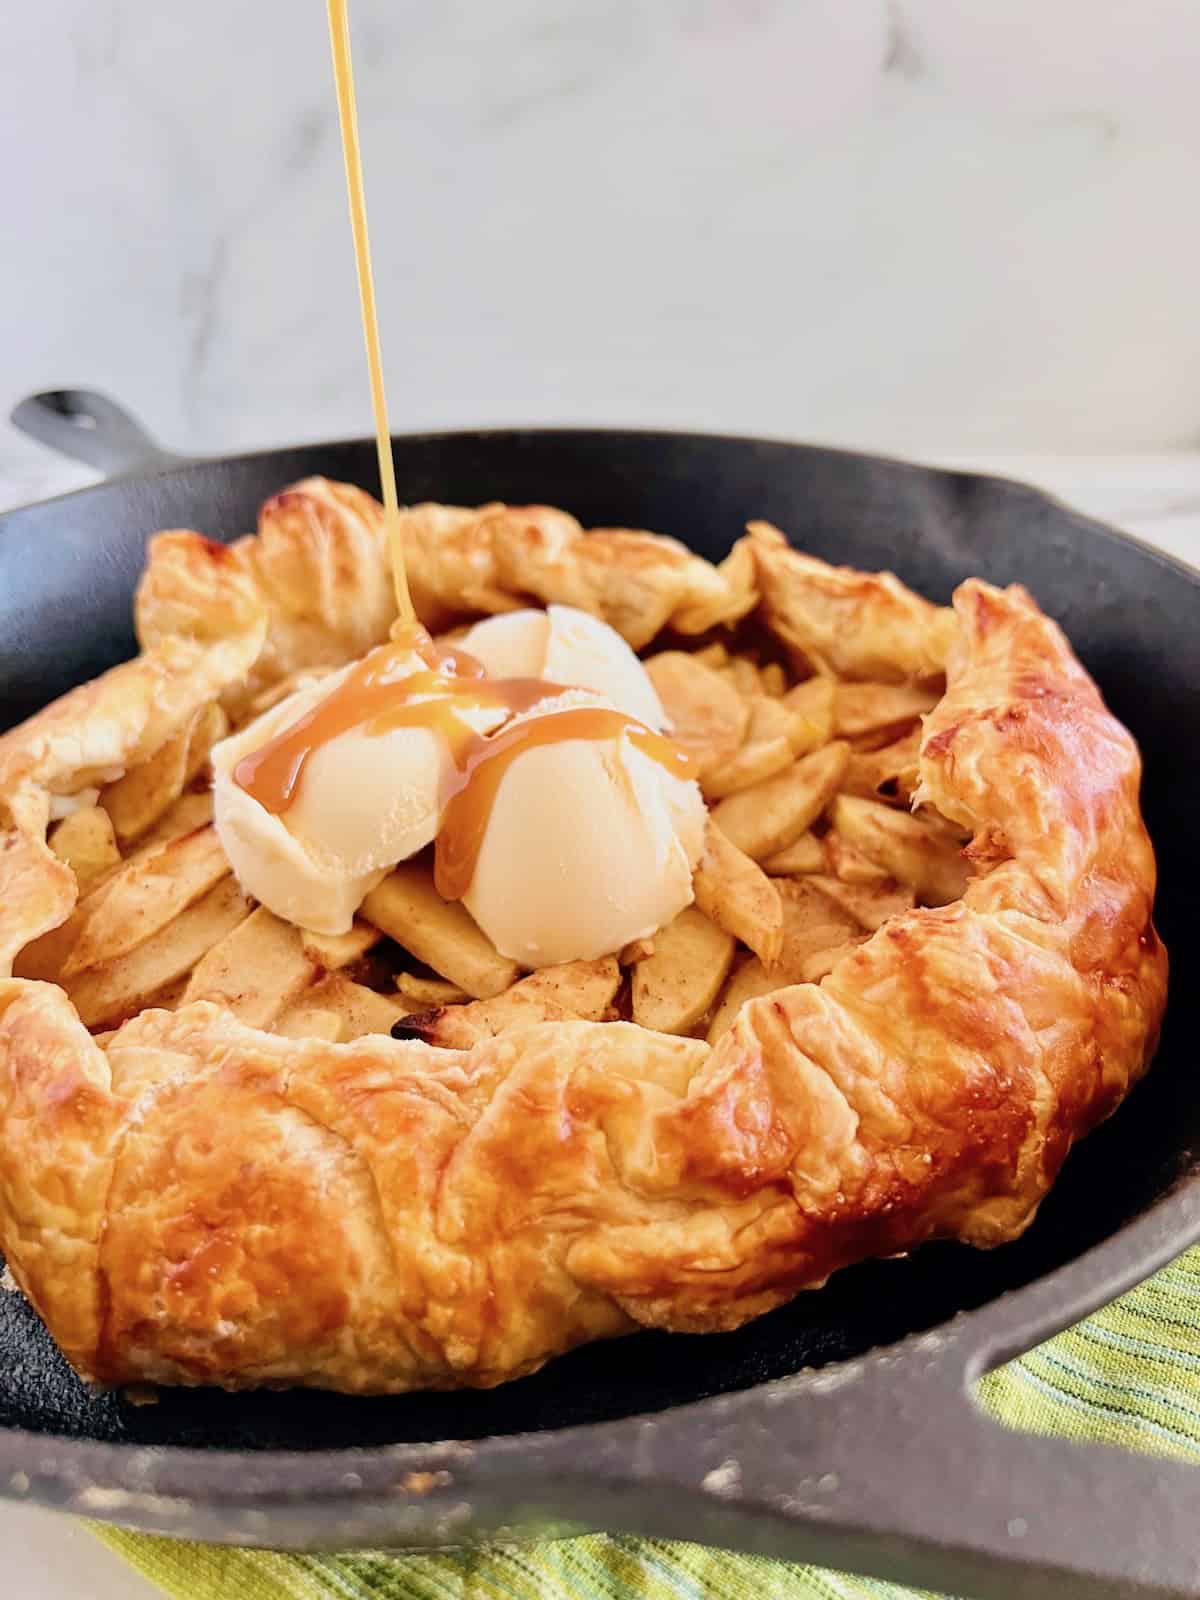 Caramel sauce pouring down over ice cream and apple galette in a cast iron skillet.